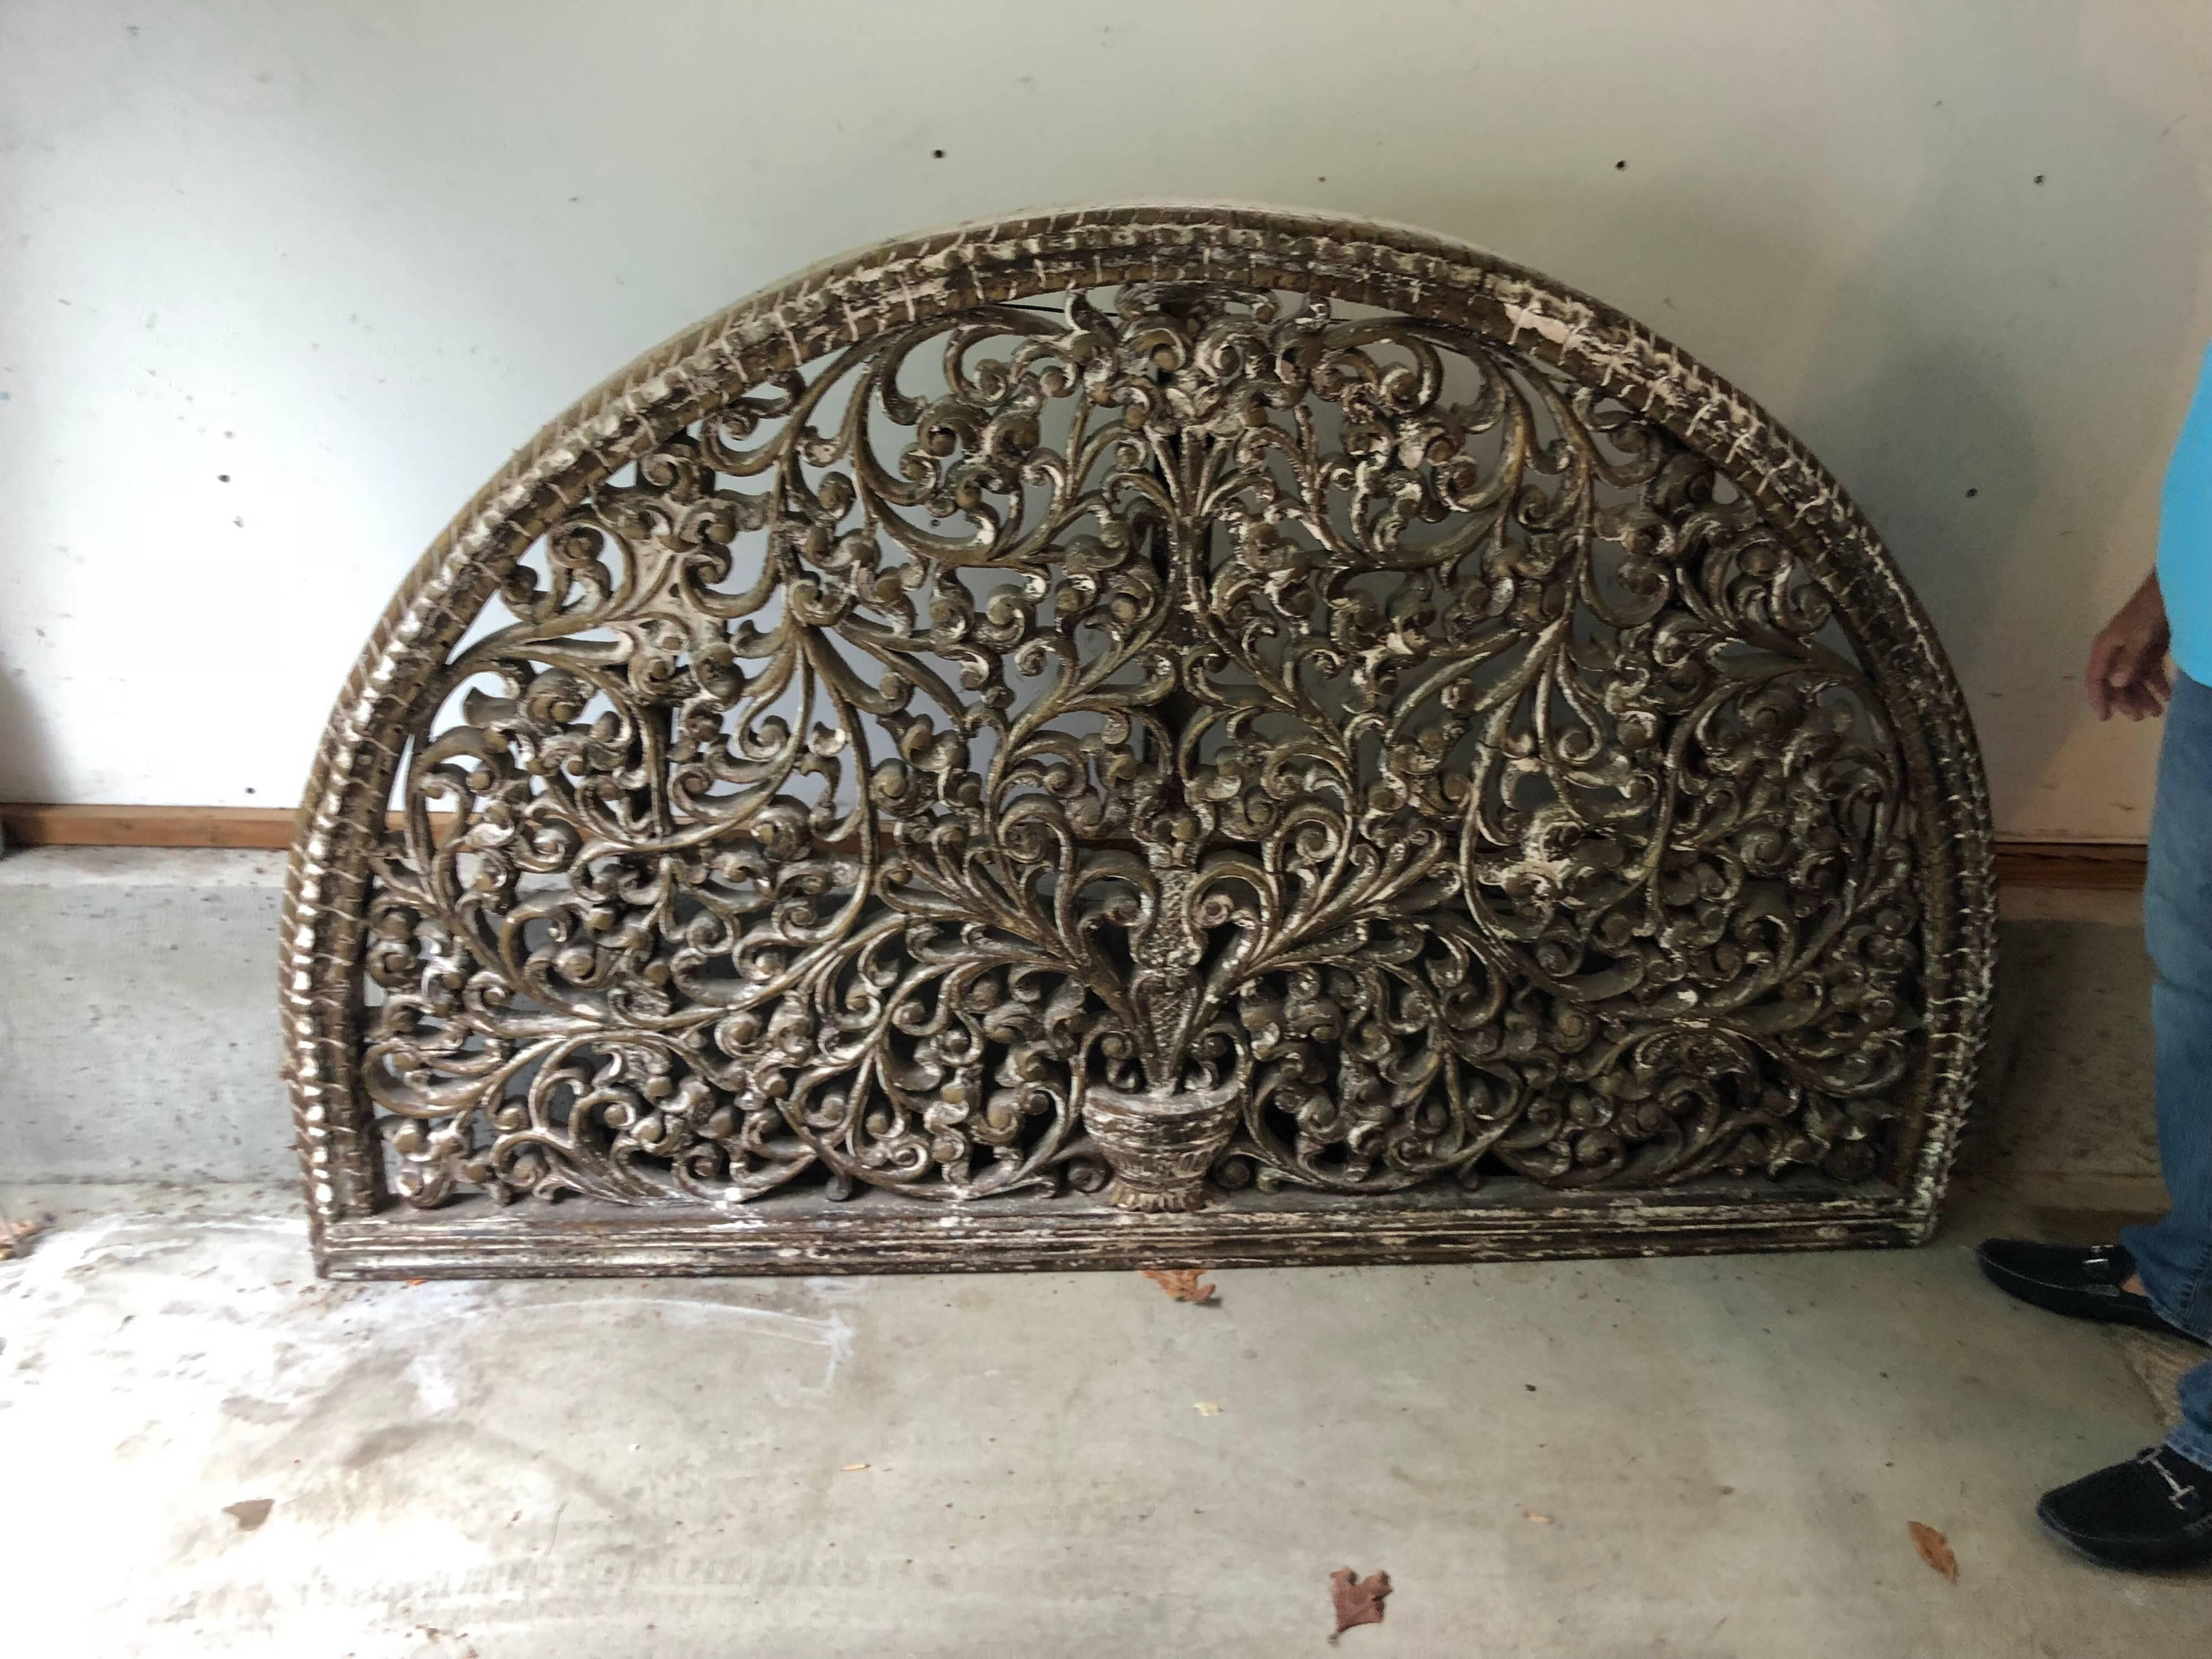 Huge carved wooden wall hanging or headboard. Perfect as a headboard or wall hanging. Carved solid wooden half moon design with a white washed antique look. Some pieces of the wood have cracks.